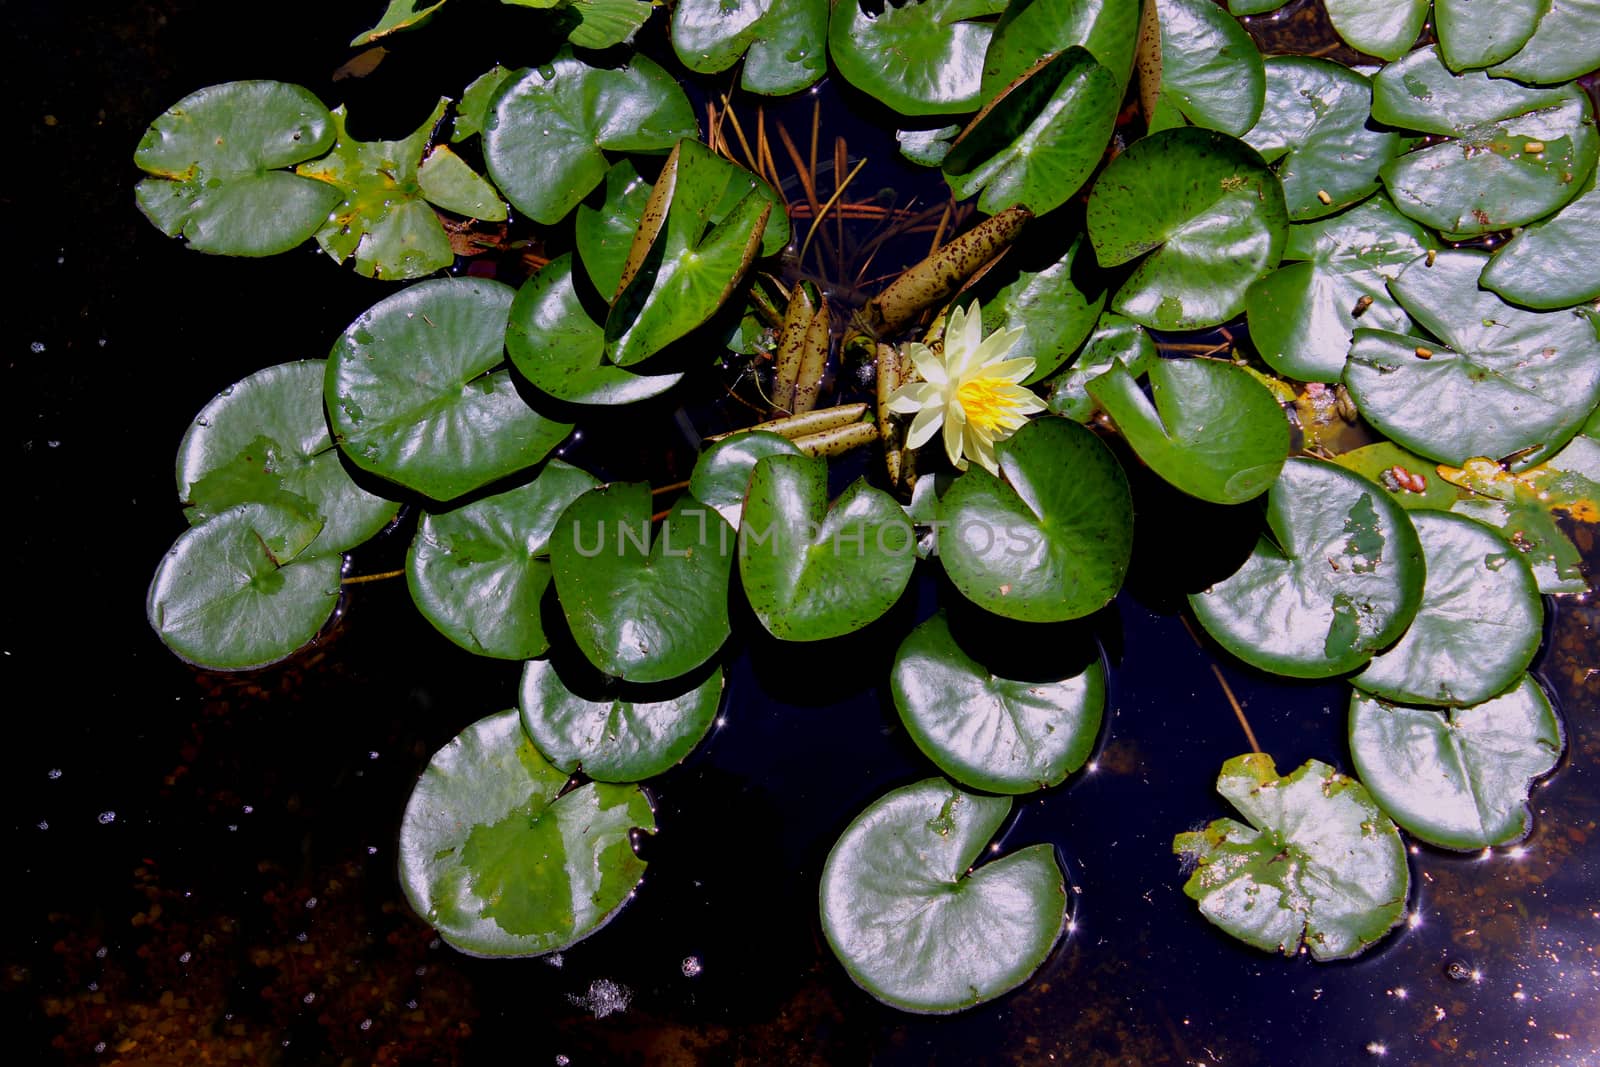 Members of this family are commonly called water lilies and live as rhizomatous aquatic herbs in temperate and tropical climates around the world. The family contains five genera with about 70 known species. Water lilies are rooted in soil in bodies of water, with leaves and flowers floating on or emergent from the surface. 